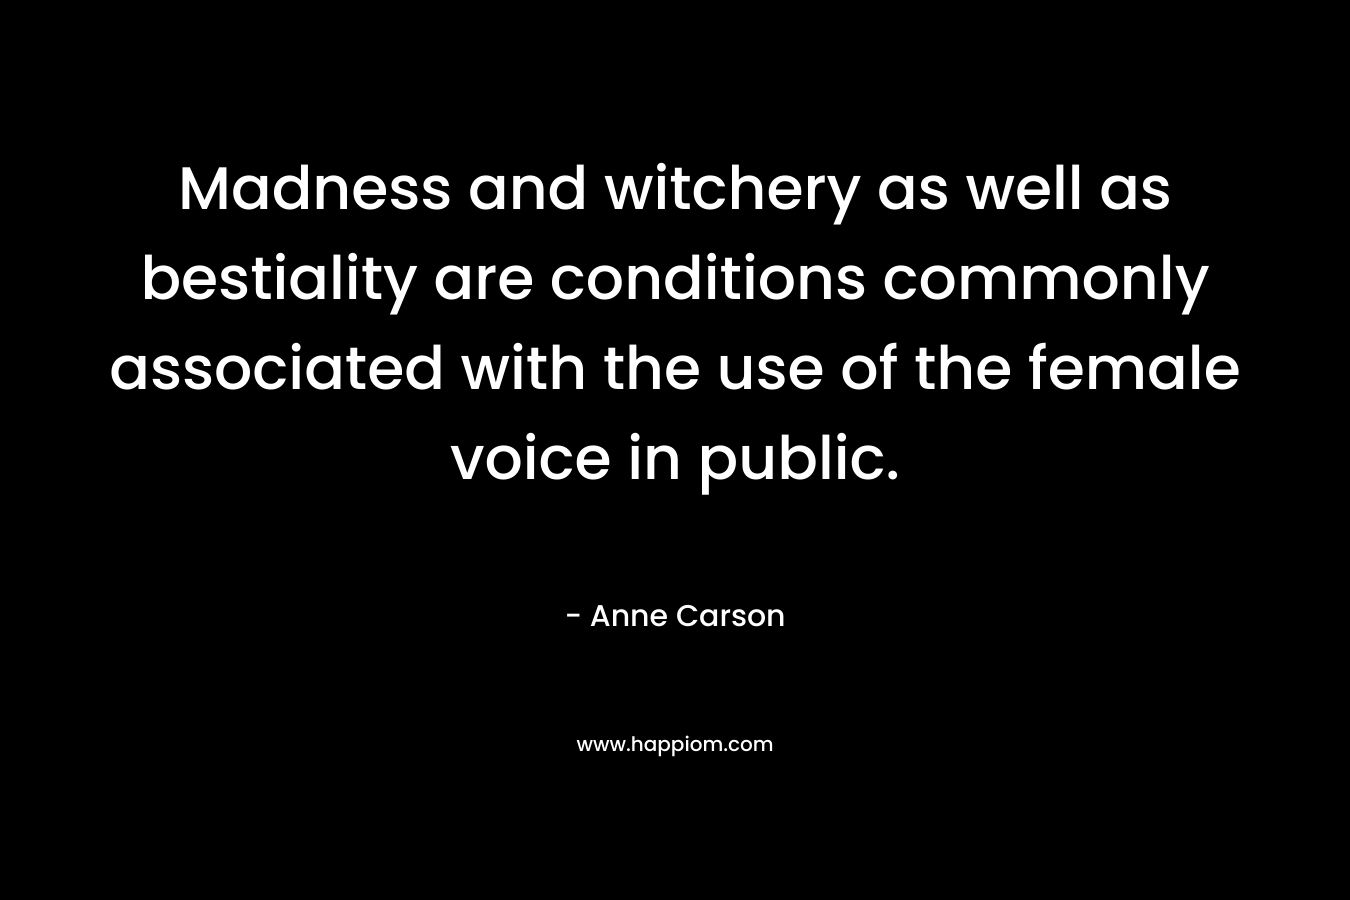 Madness and witchery as well as bestiality are conditions commonly associated with the use of the female voice in public. – Anne Carson